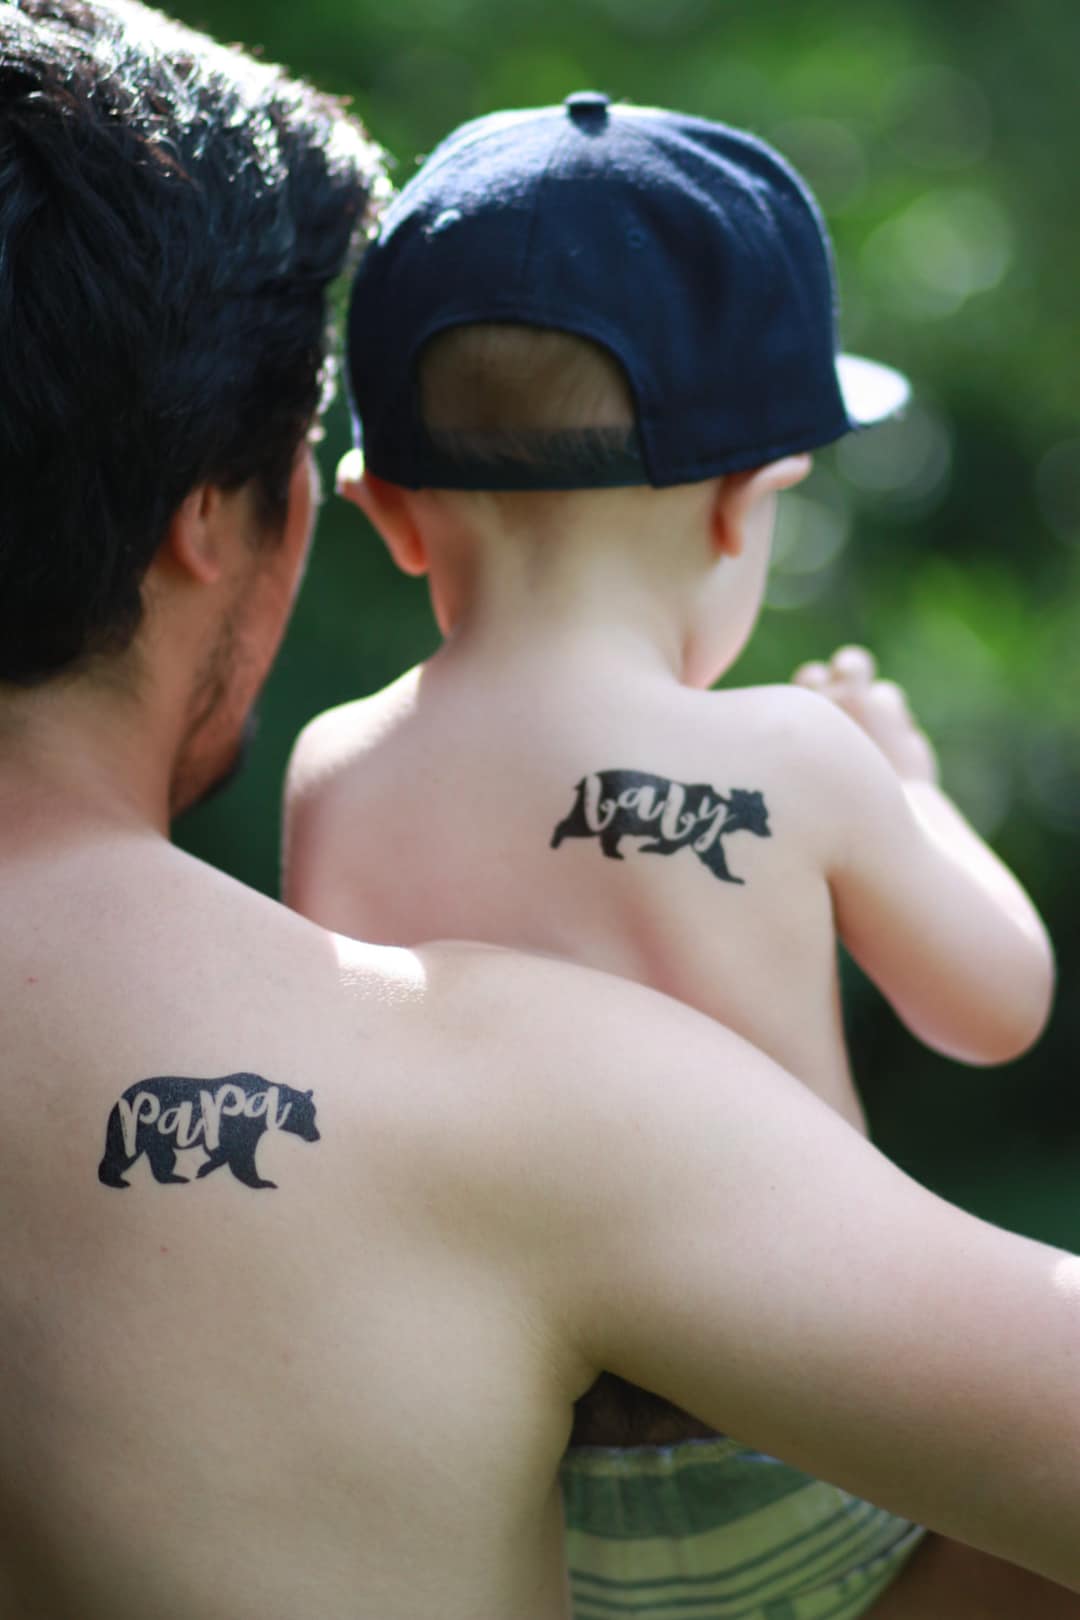 Miscarriage tattoos that help parents remember their babies | Kidspot